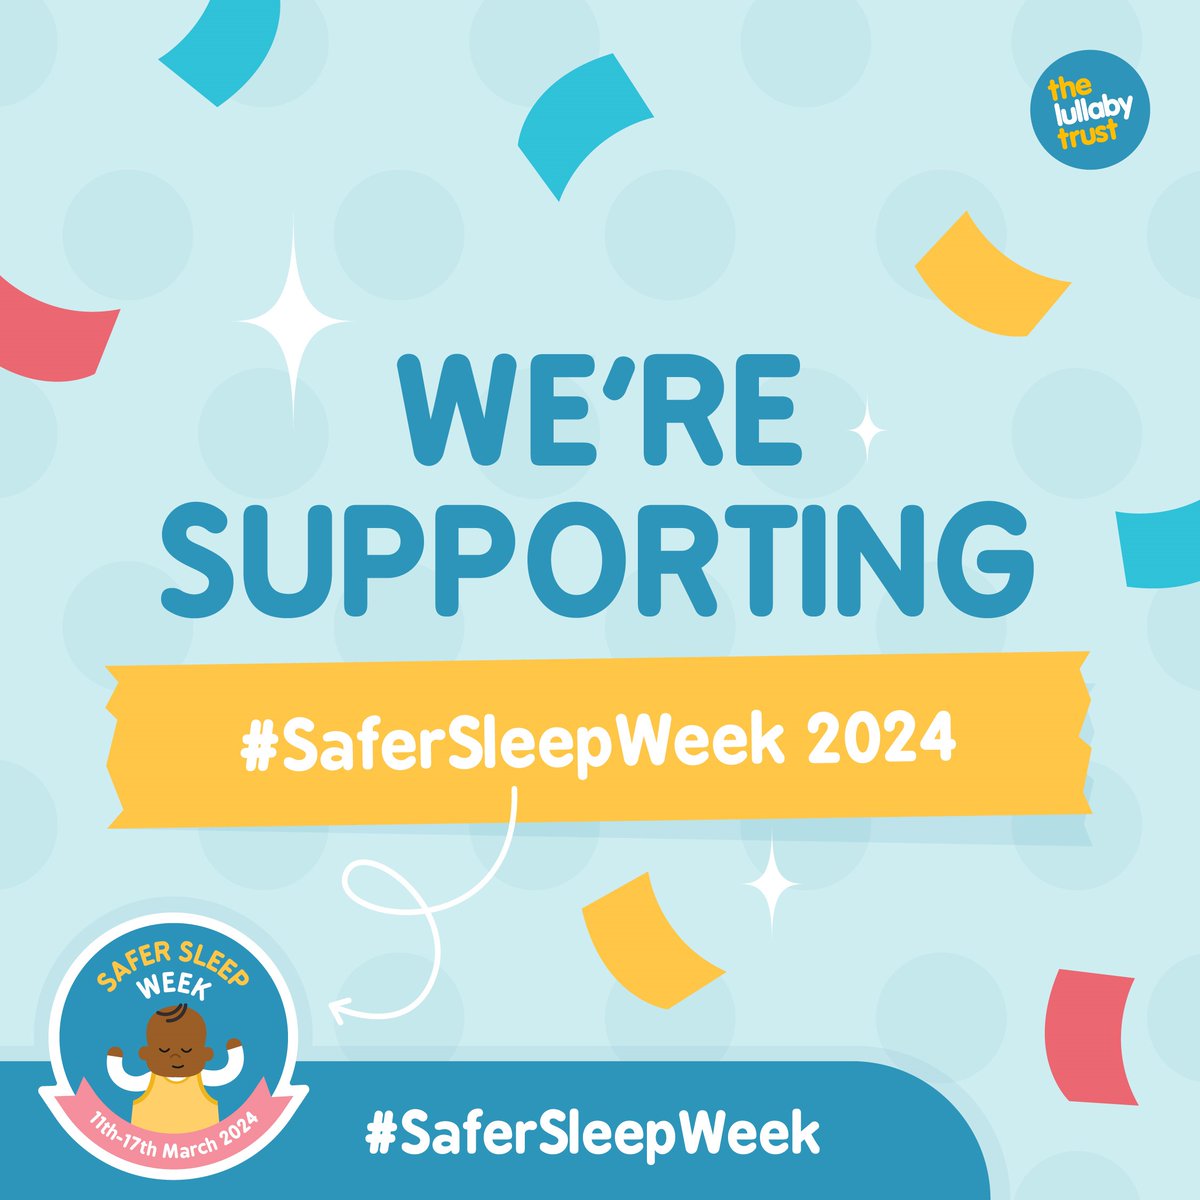 It's #SaferSleepWeek & together with partners, we're using the week to promote an initiative we've developed, which aims to reduce the number of Sudden Unexplained Death of an Infant (SUDI) cases across Merseyside. Read more ⬇️ orlo.uk/RtF89 @Mersey_Care @NHSCandM